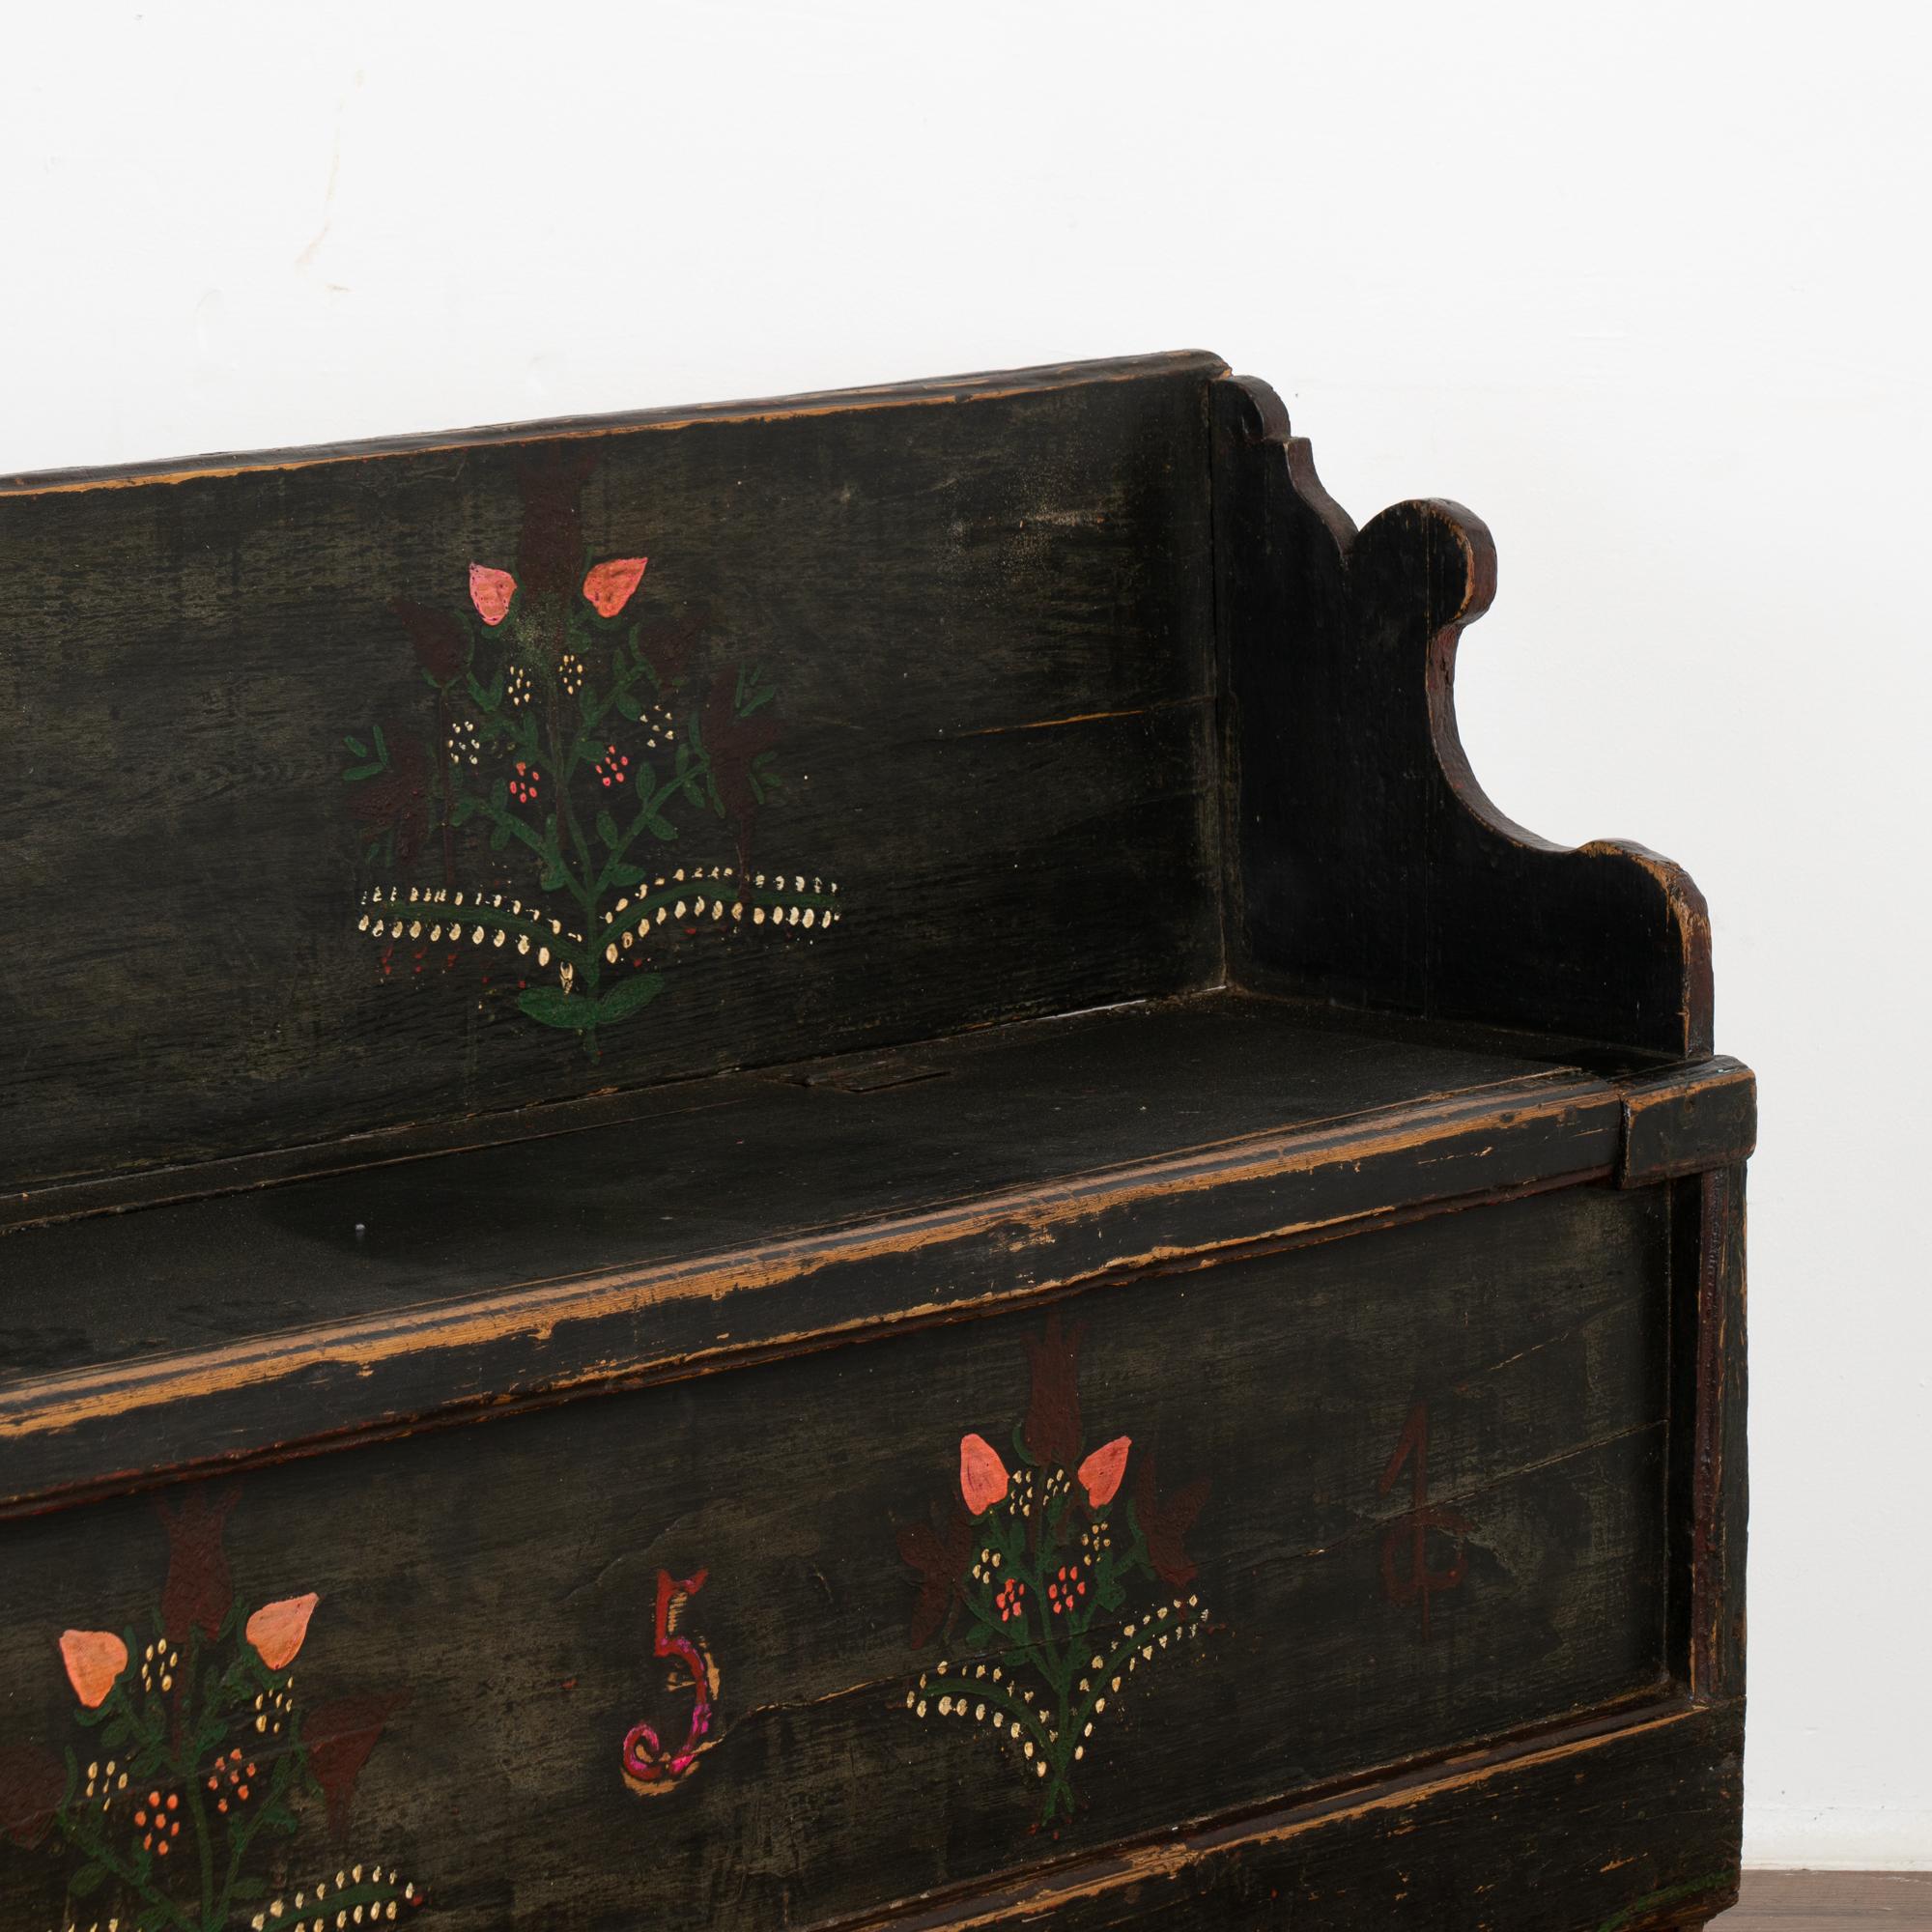 Original Black Painted Narrow Pine Bench With Storage, Hungary dated 1951 For Sale 2